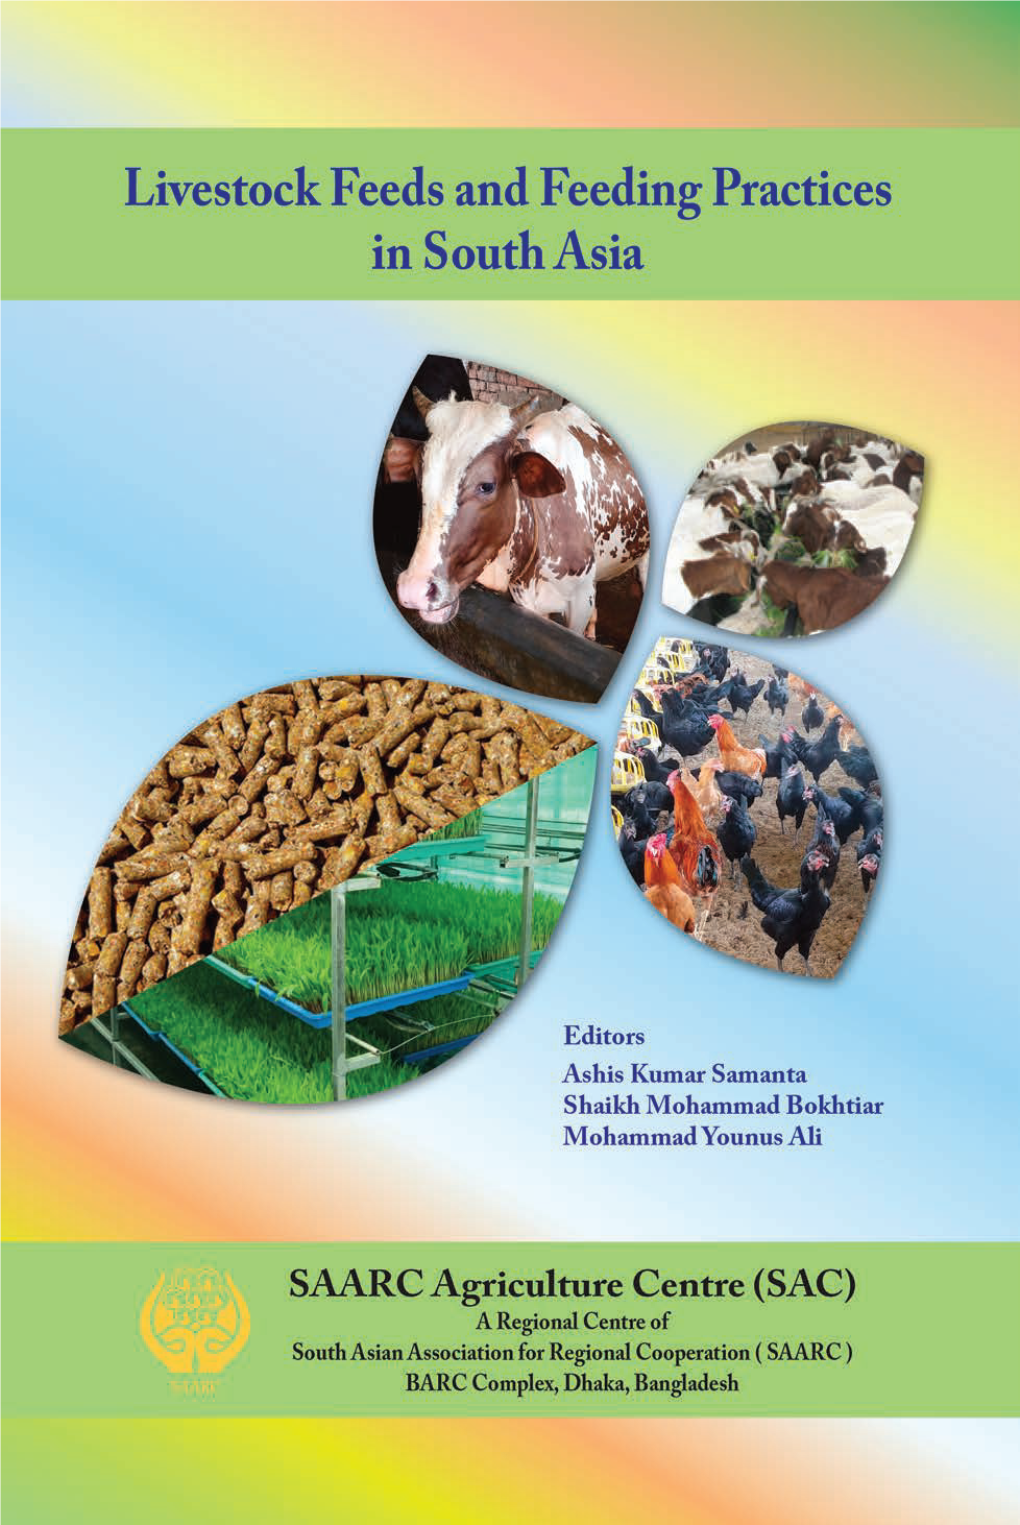 Livestock Feeds and Feeding Practices in South Asia